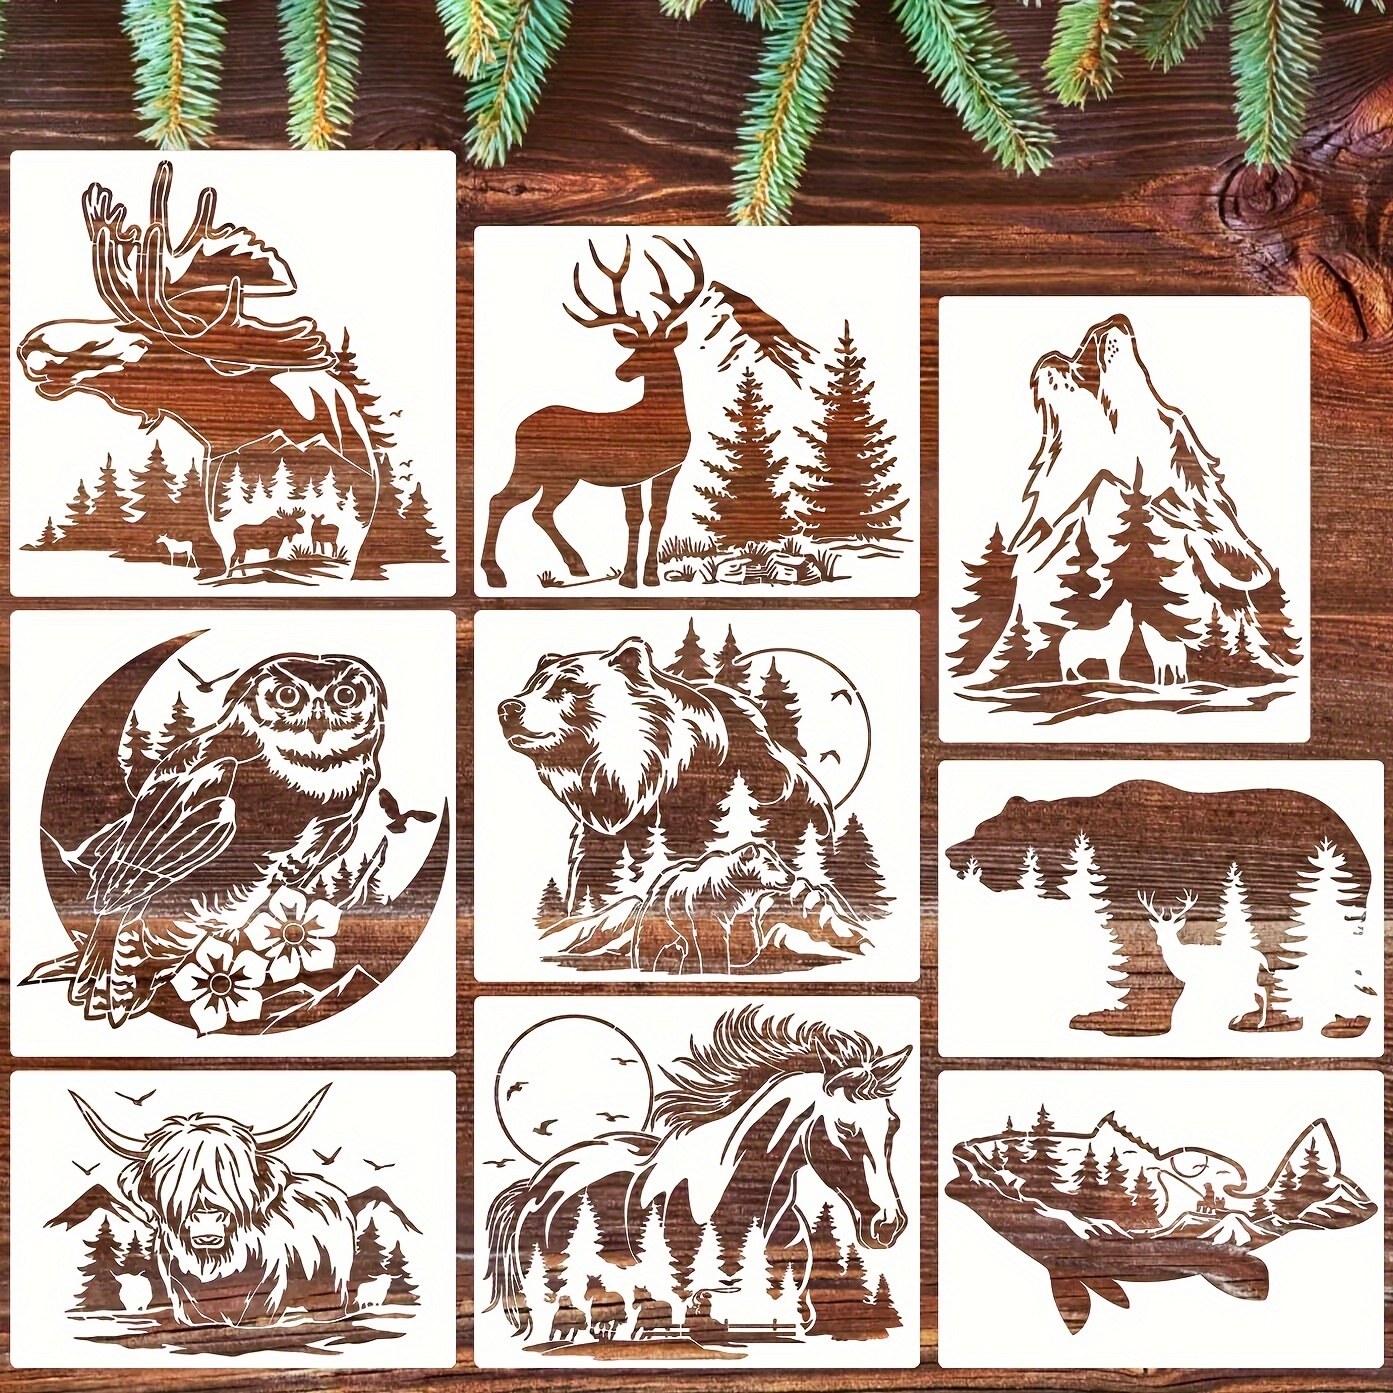 

9-piece Forest Animal Stencils Set For Home Decor - Versatile Craft Templates For Wood, Canvas, Paper, Fabric, Floors, Walls & More